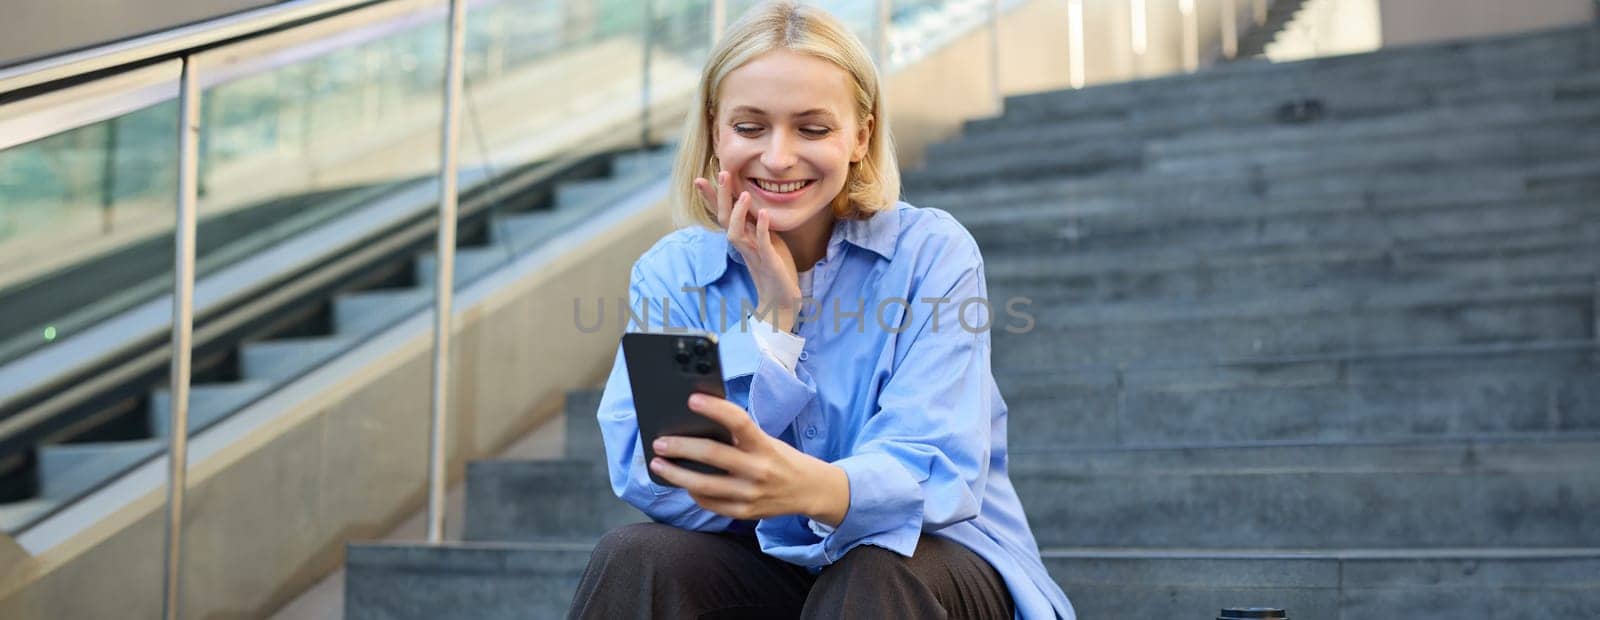 Image of young happy woman, sitting on stairs outside on street, taking selfie on smartphone camera, posing for photo social media profile, smiling.